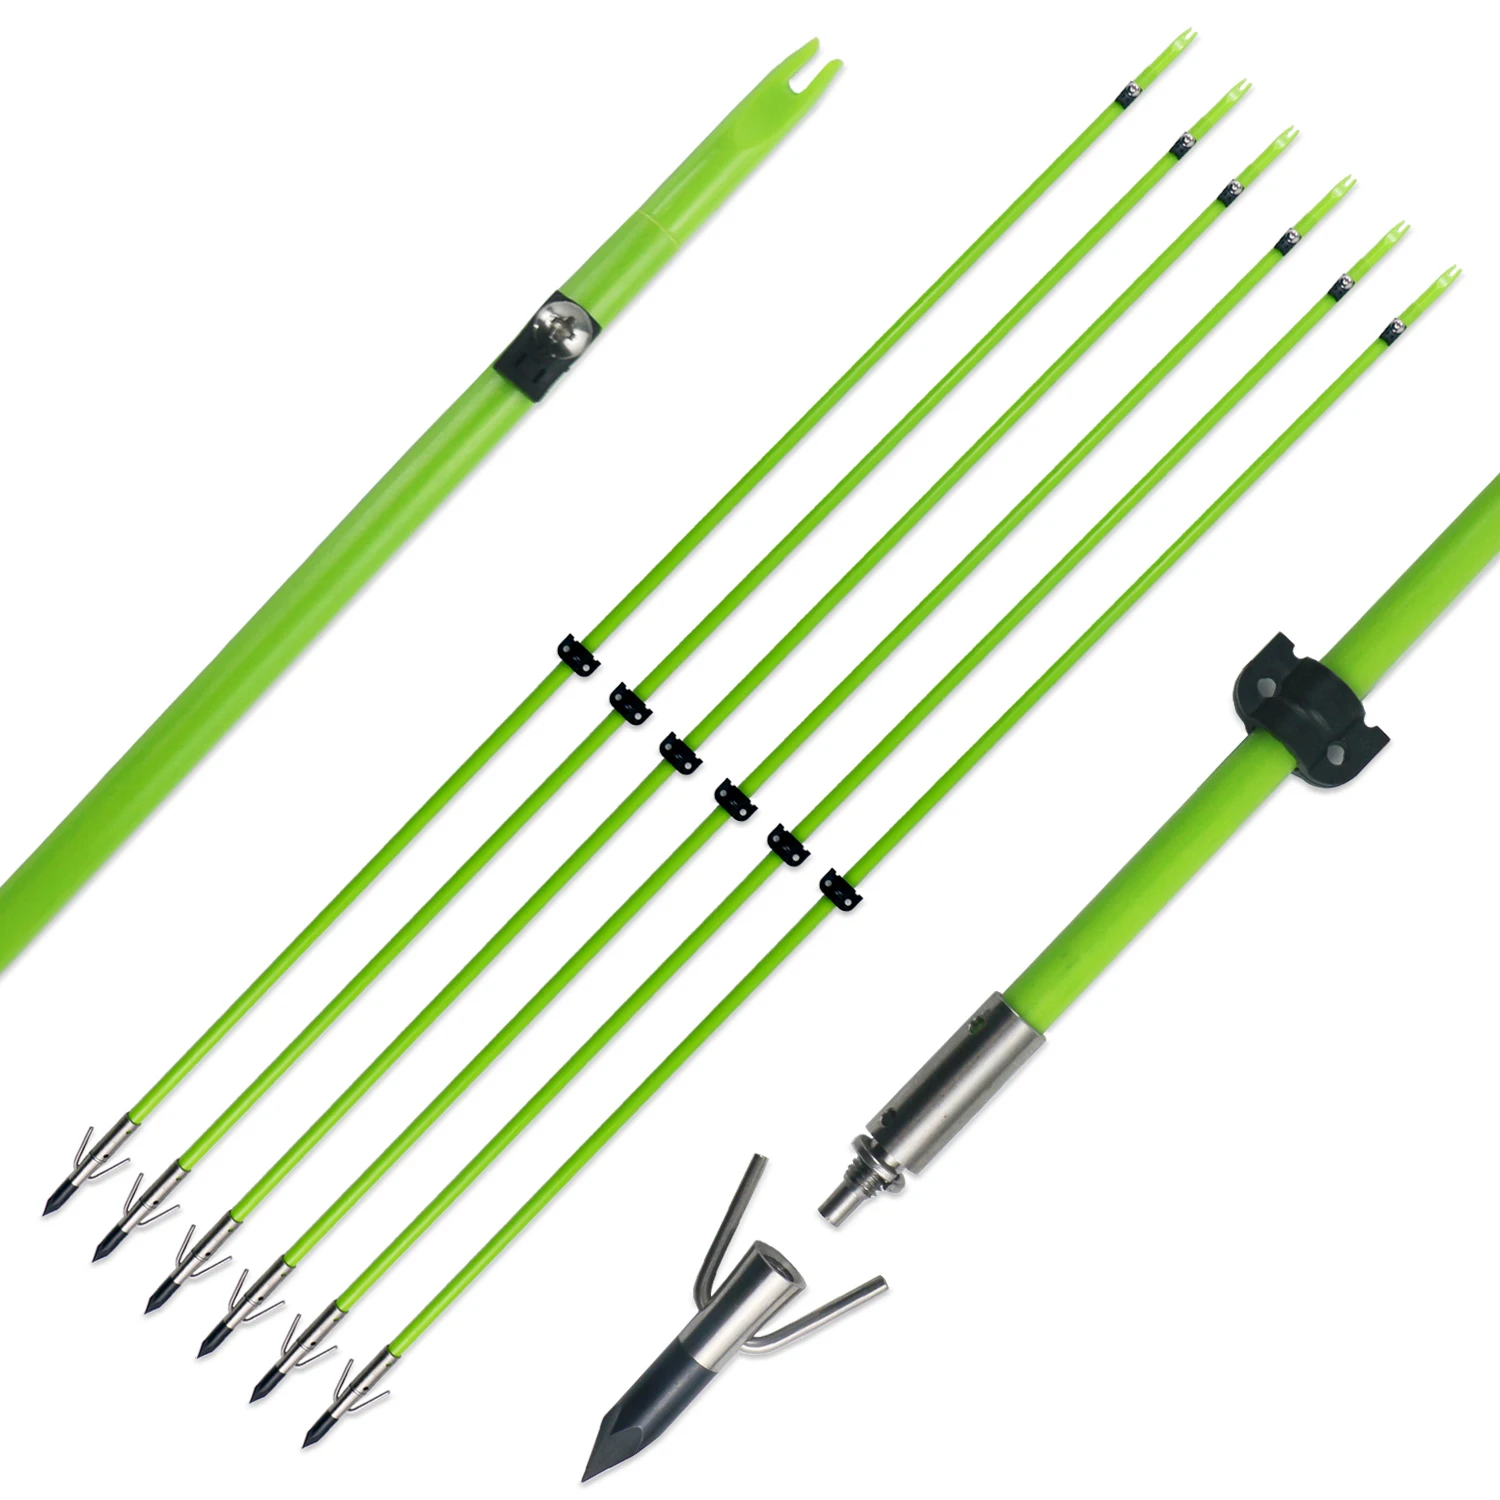 33.5 Inches Fishing Arrow Diameter 8mm Stainless Steel Tip Slide Stopper for Compound Recurve Bow Archery Hunting